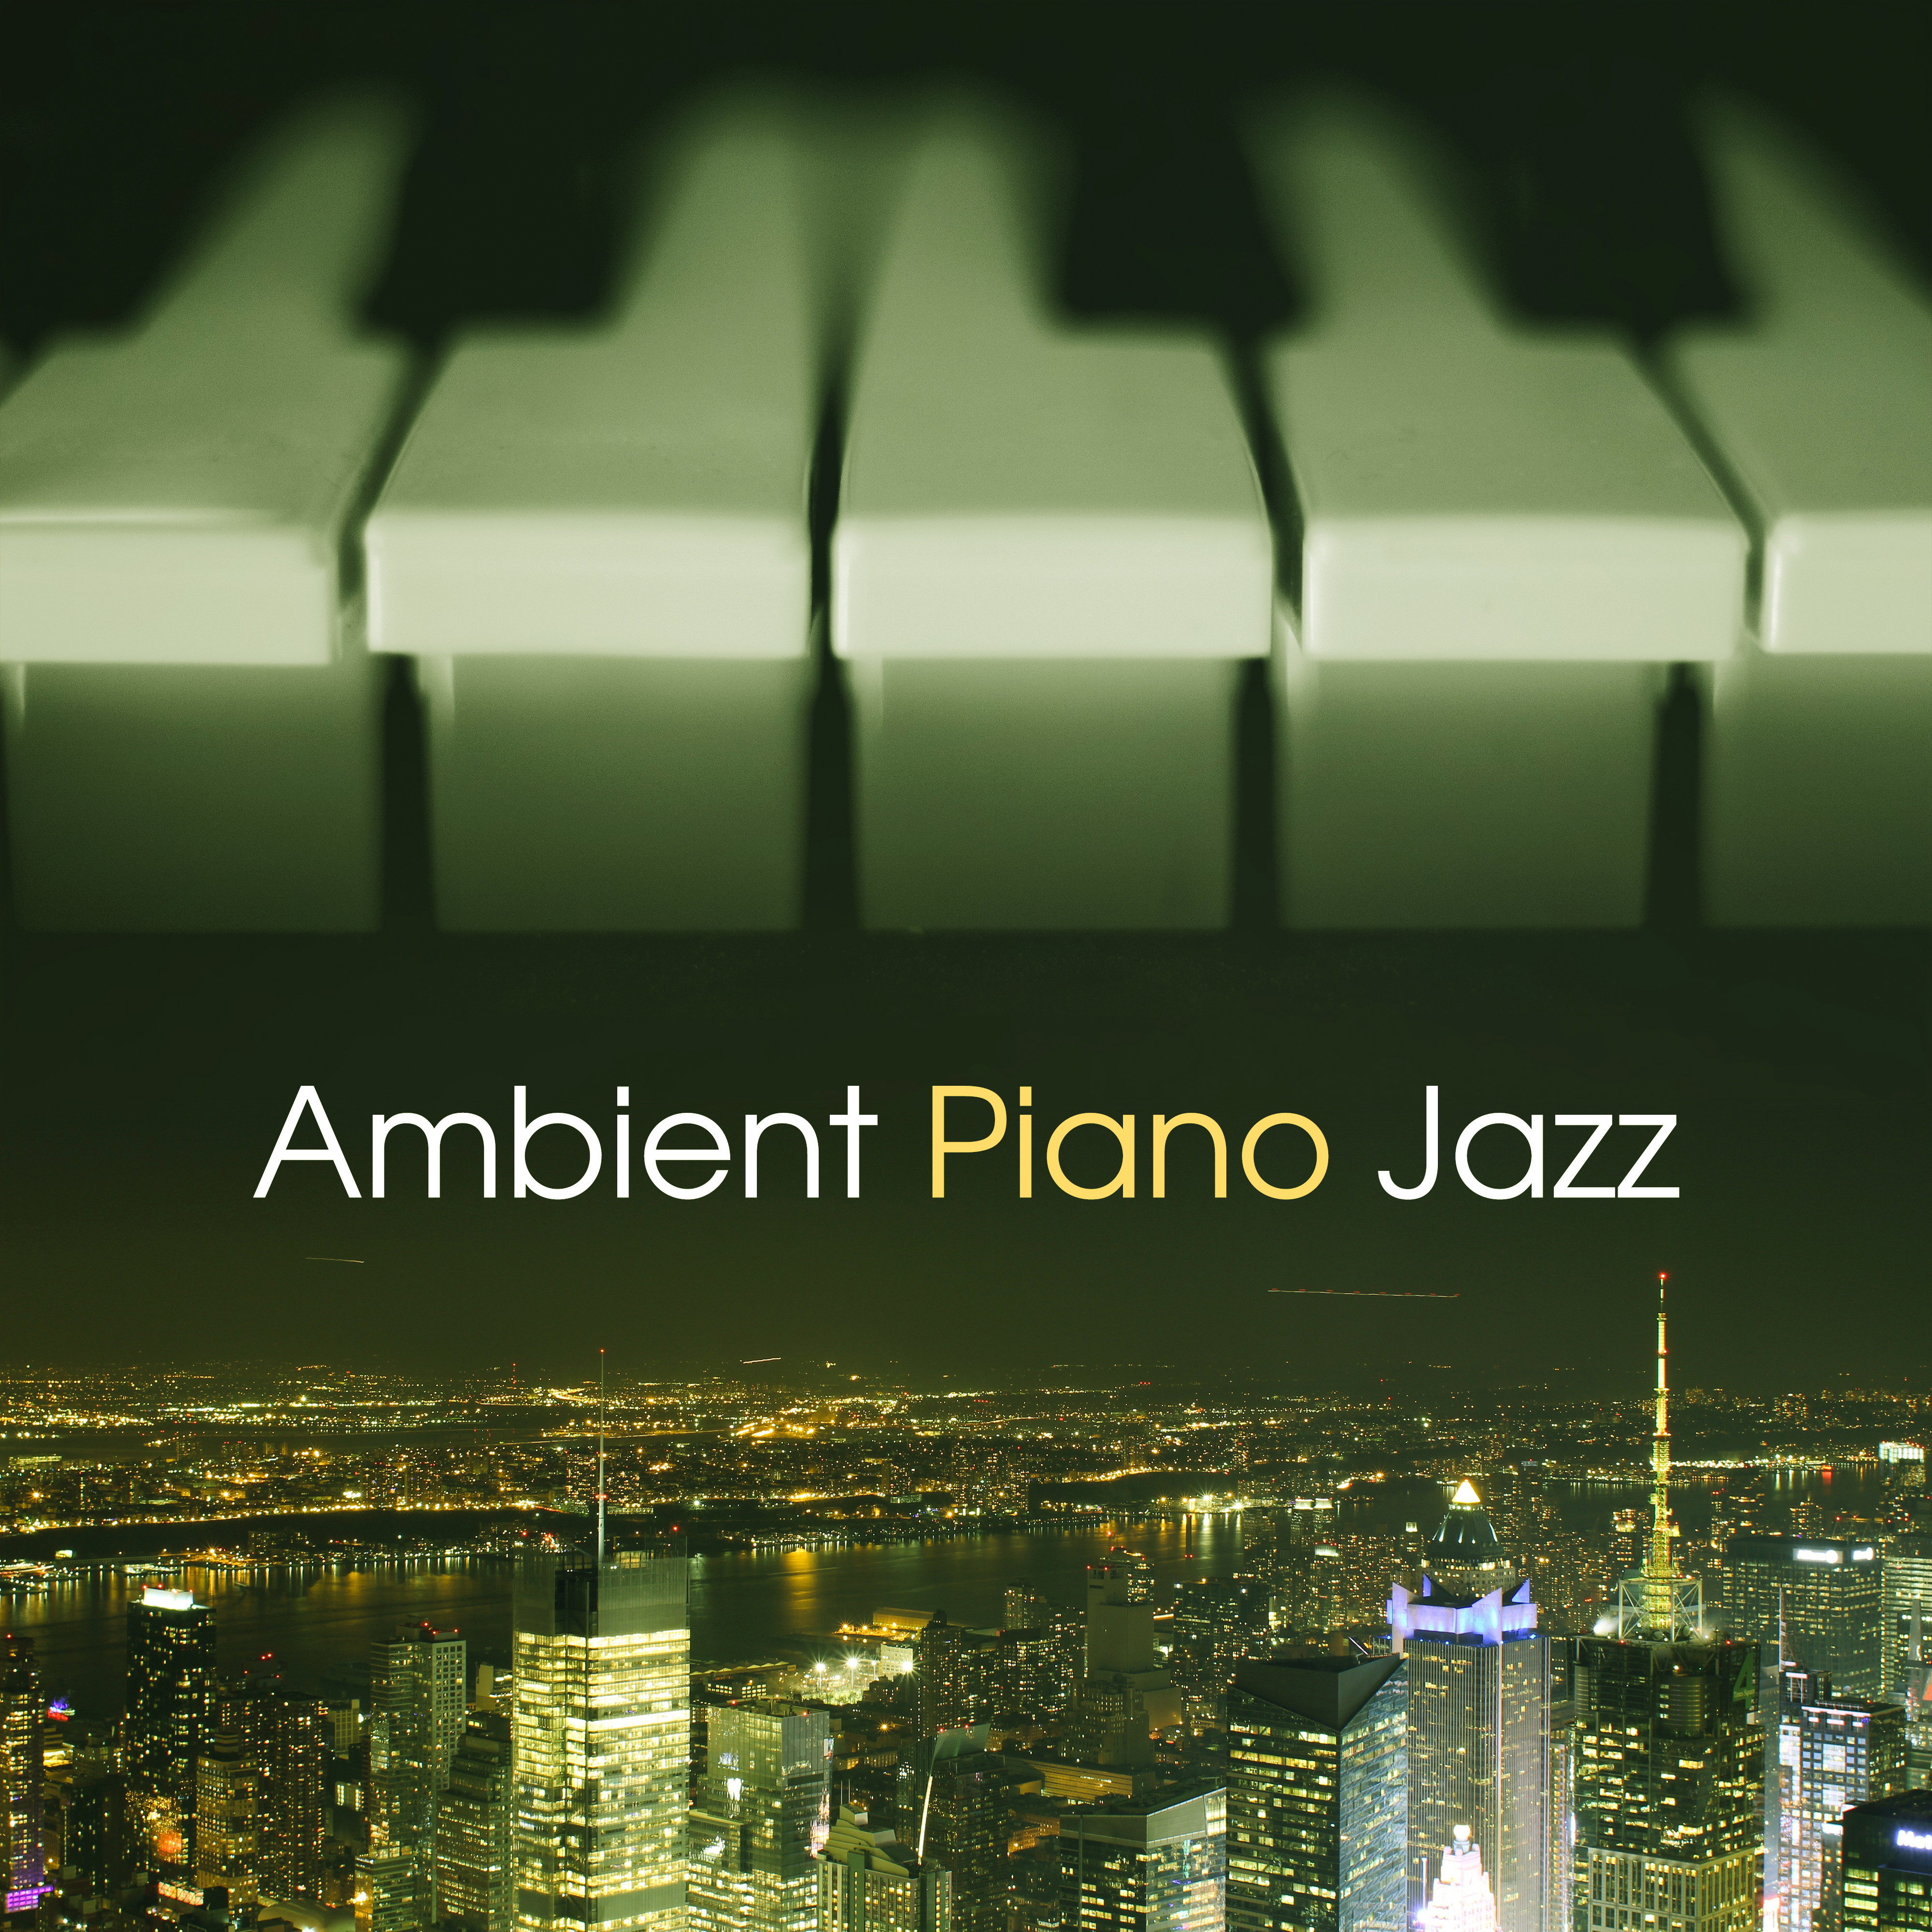 Ambient Piano Jazz  Smooth Jazz Music, Piano Bar, Moonlight Jazz, Soft Sounds to Rest